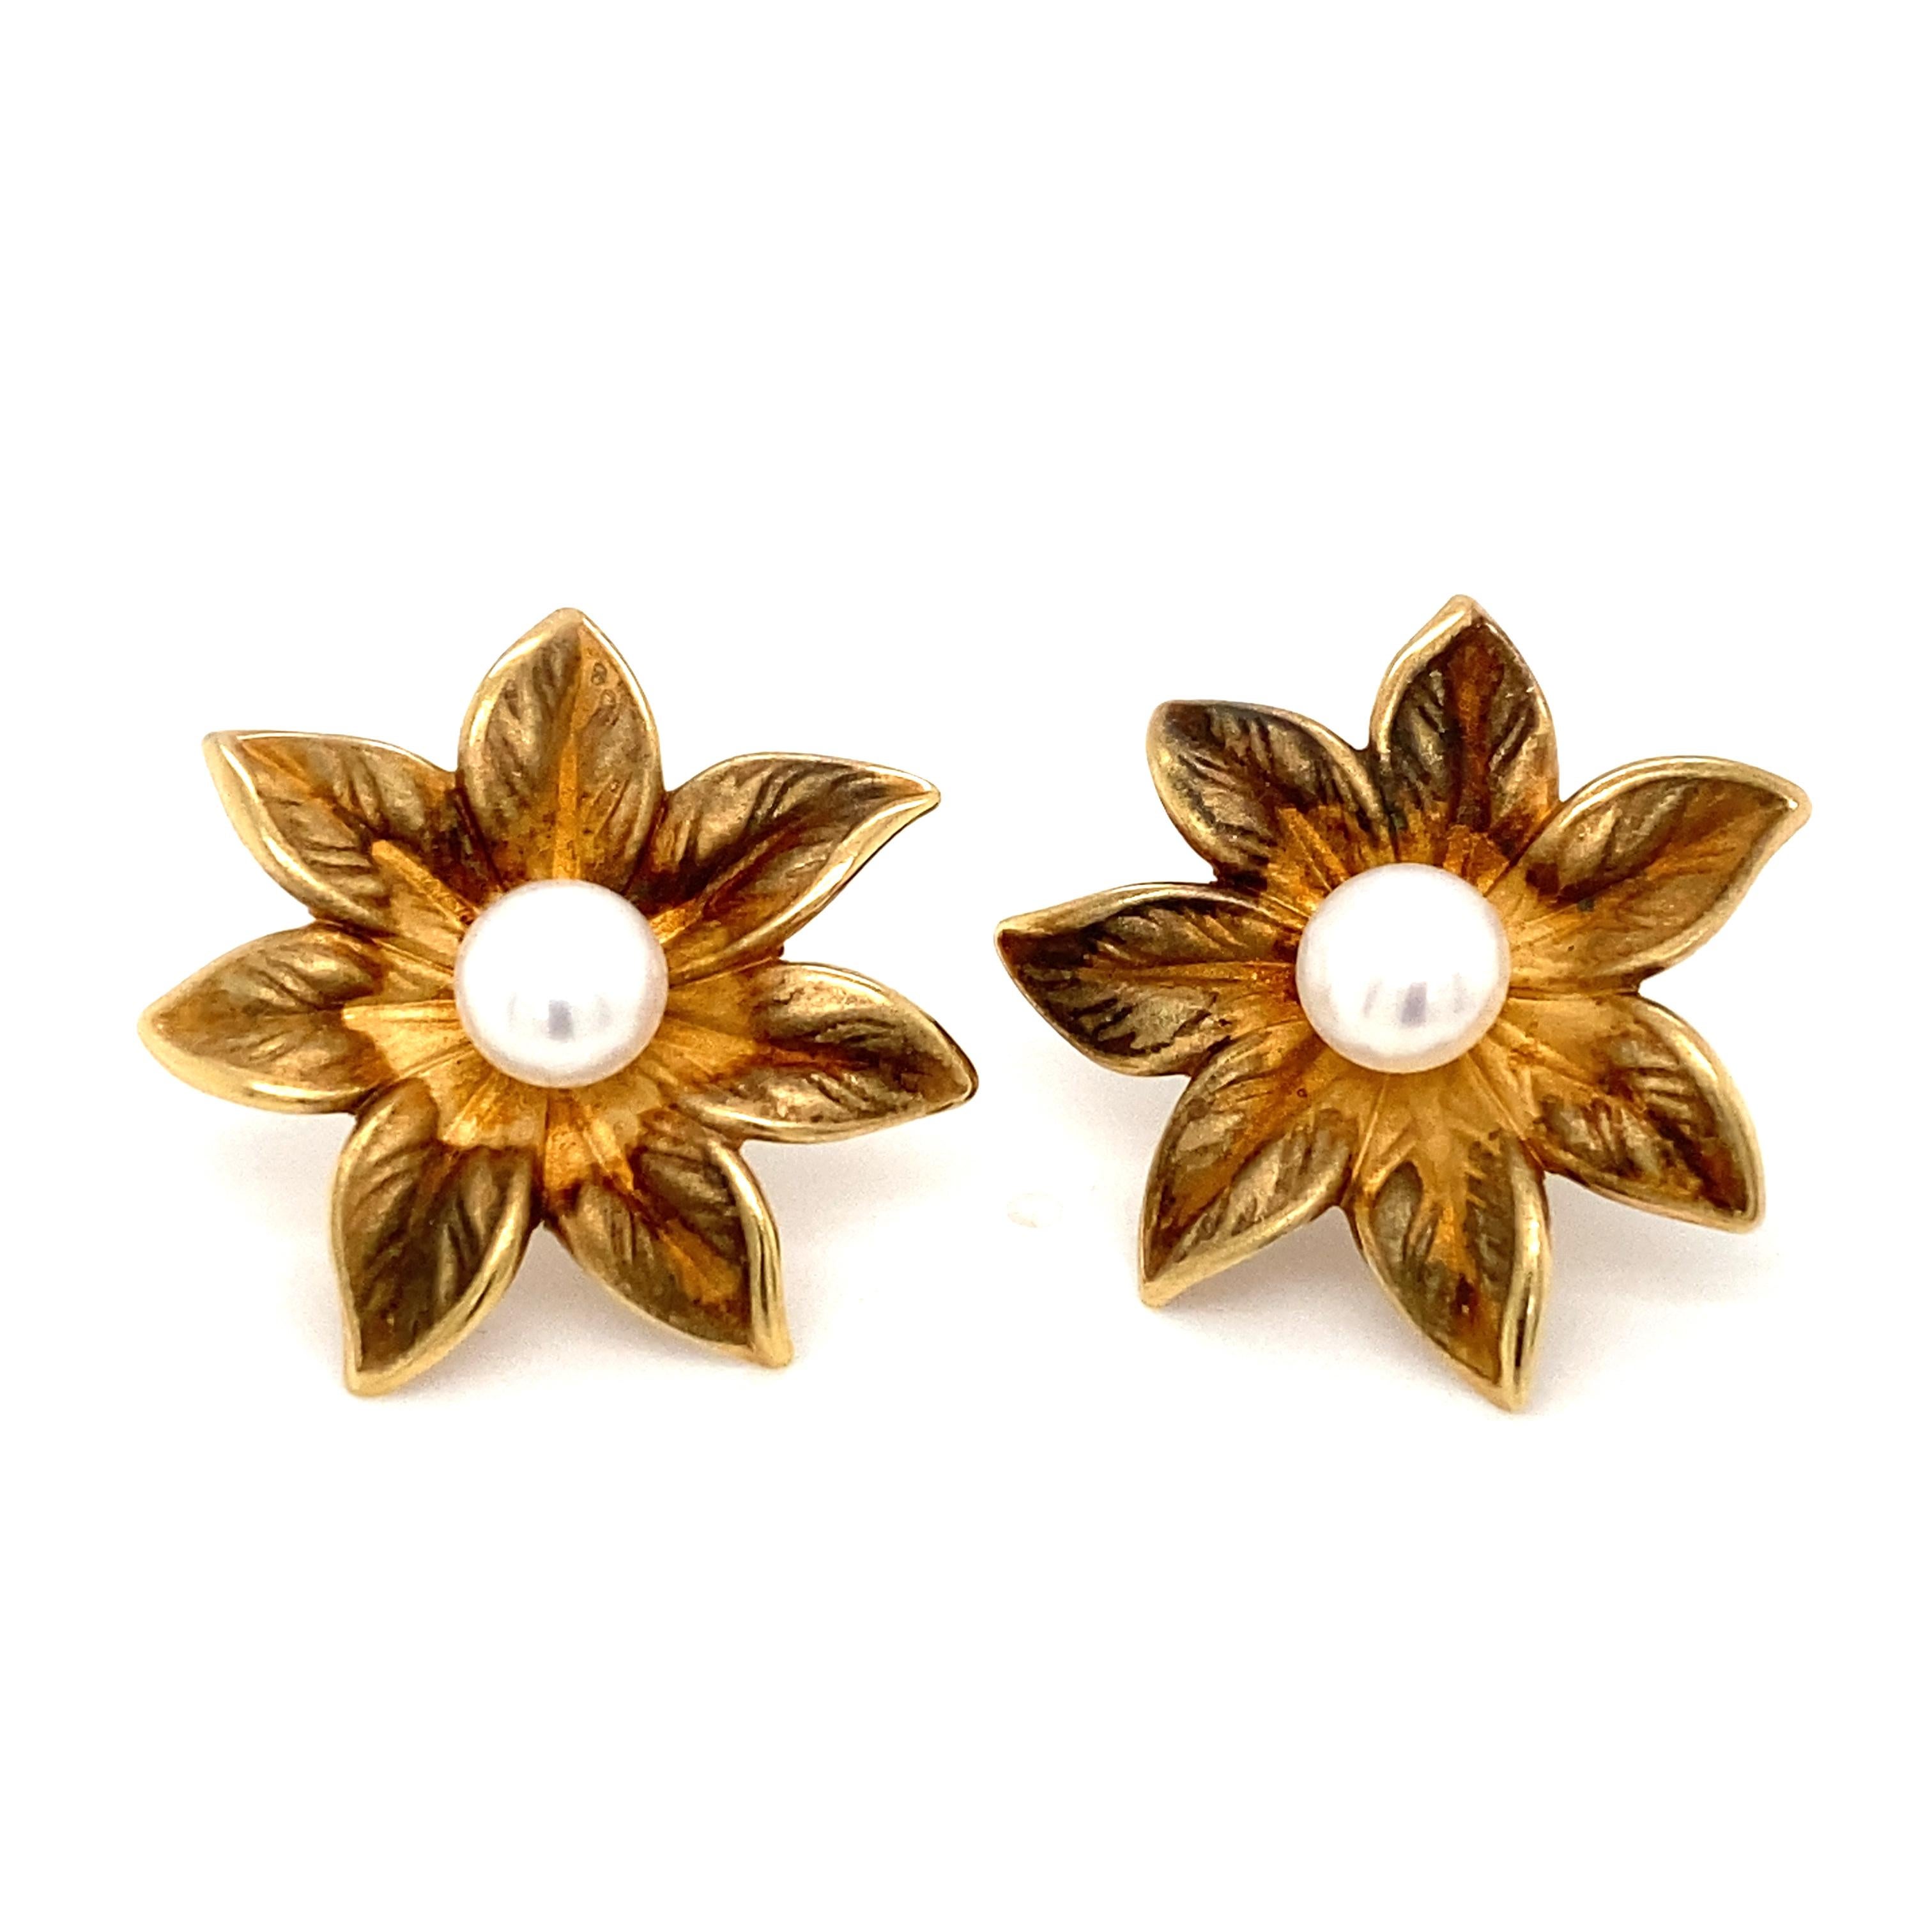 Item Details: These vintage earrings have Akoya Pearls in the centers with a brushed gold design on the flower petals. The earrings are crafted in 14 karat yellow gold. The high contrast of yellow gold sits beautifully with a pop of pearl in the